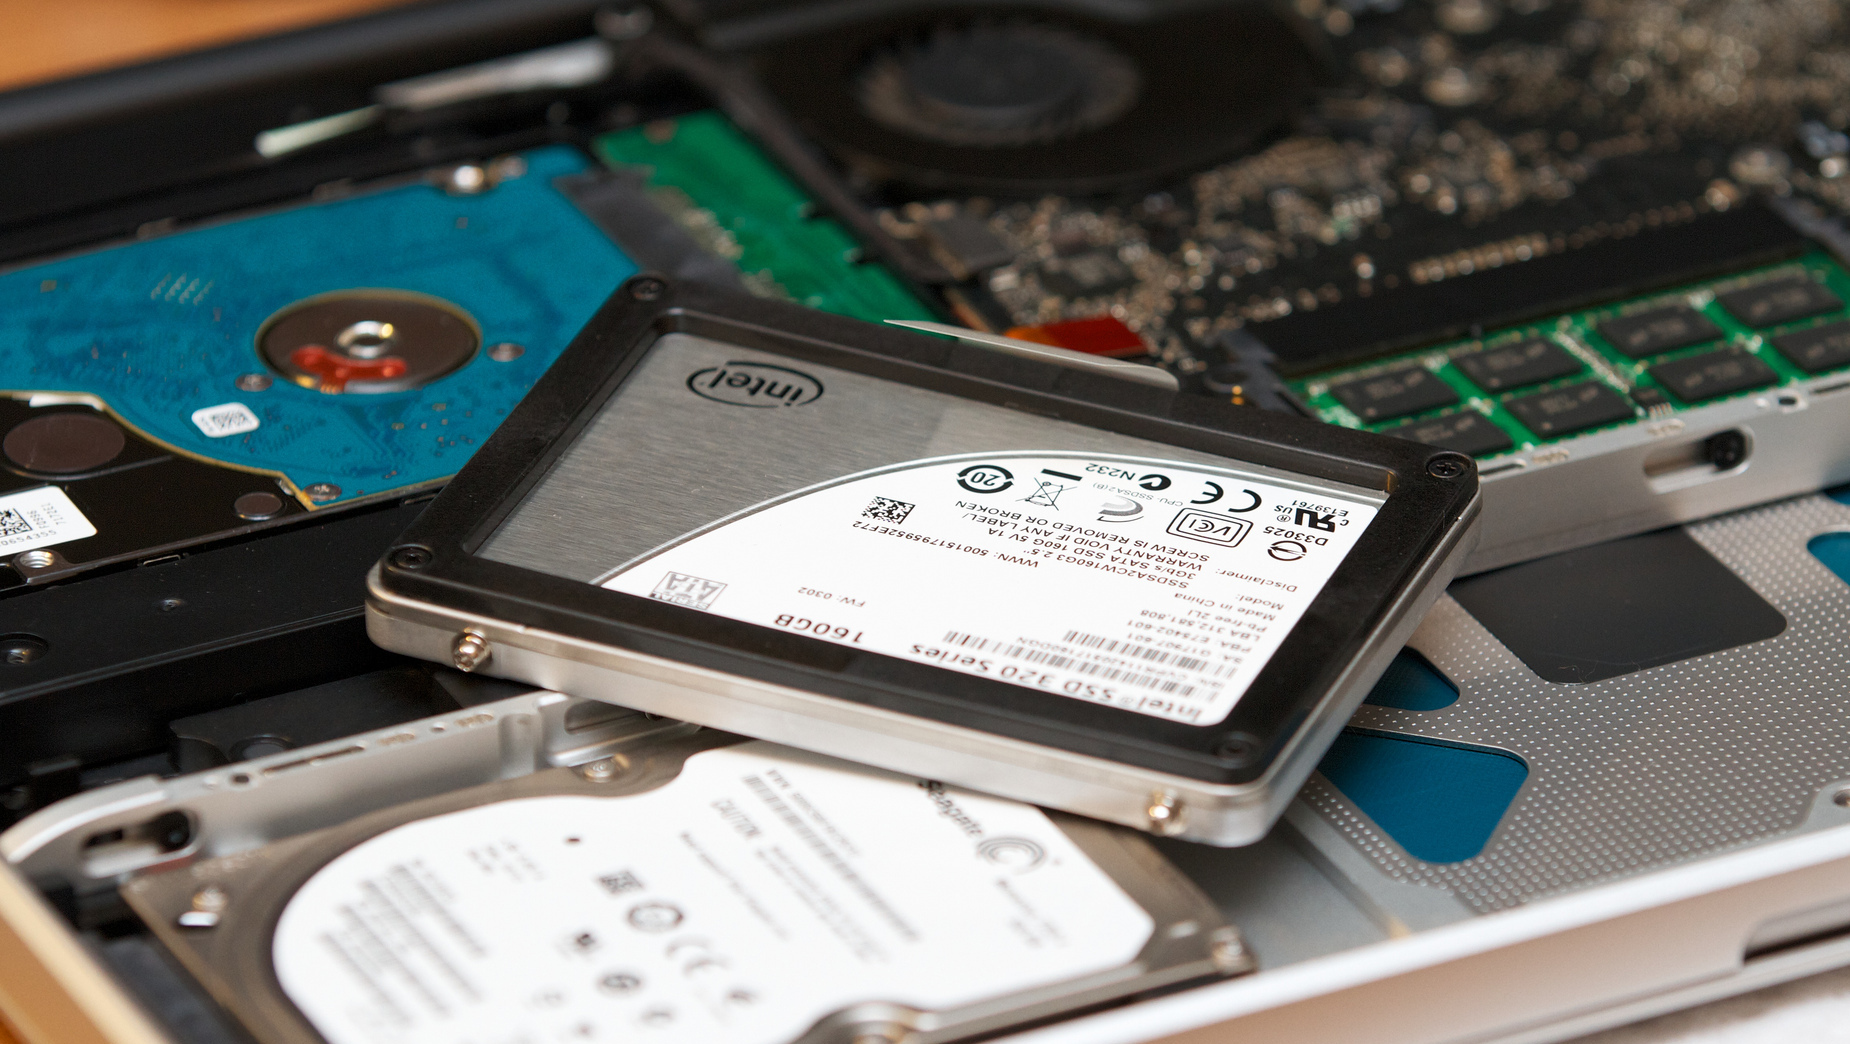 5 Best SSDs for Laptops: Your Buyer’s Guide (2019) | Heavy.com